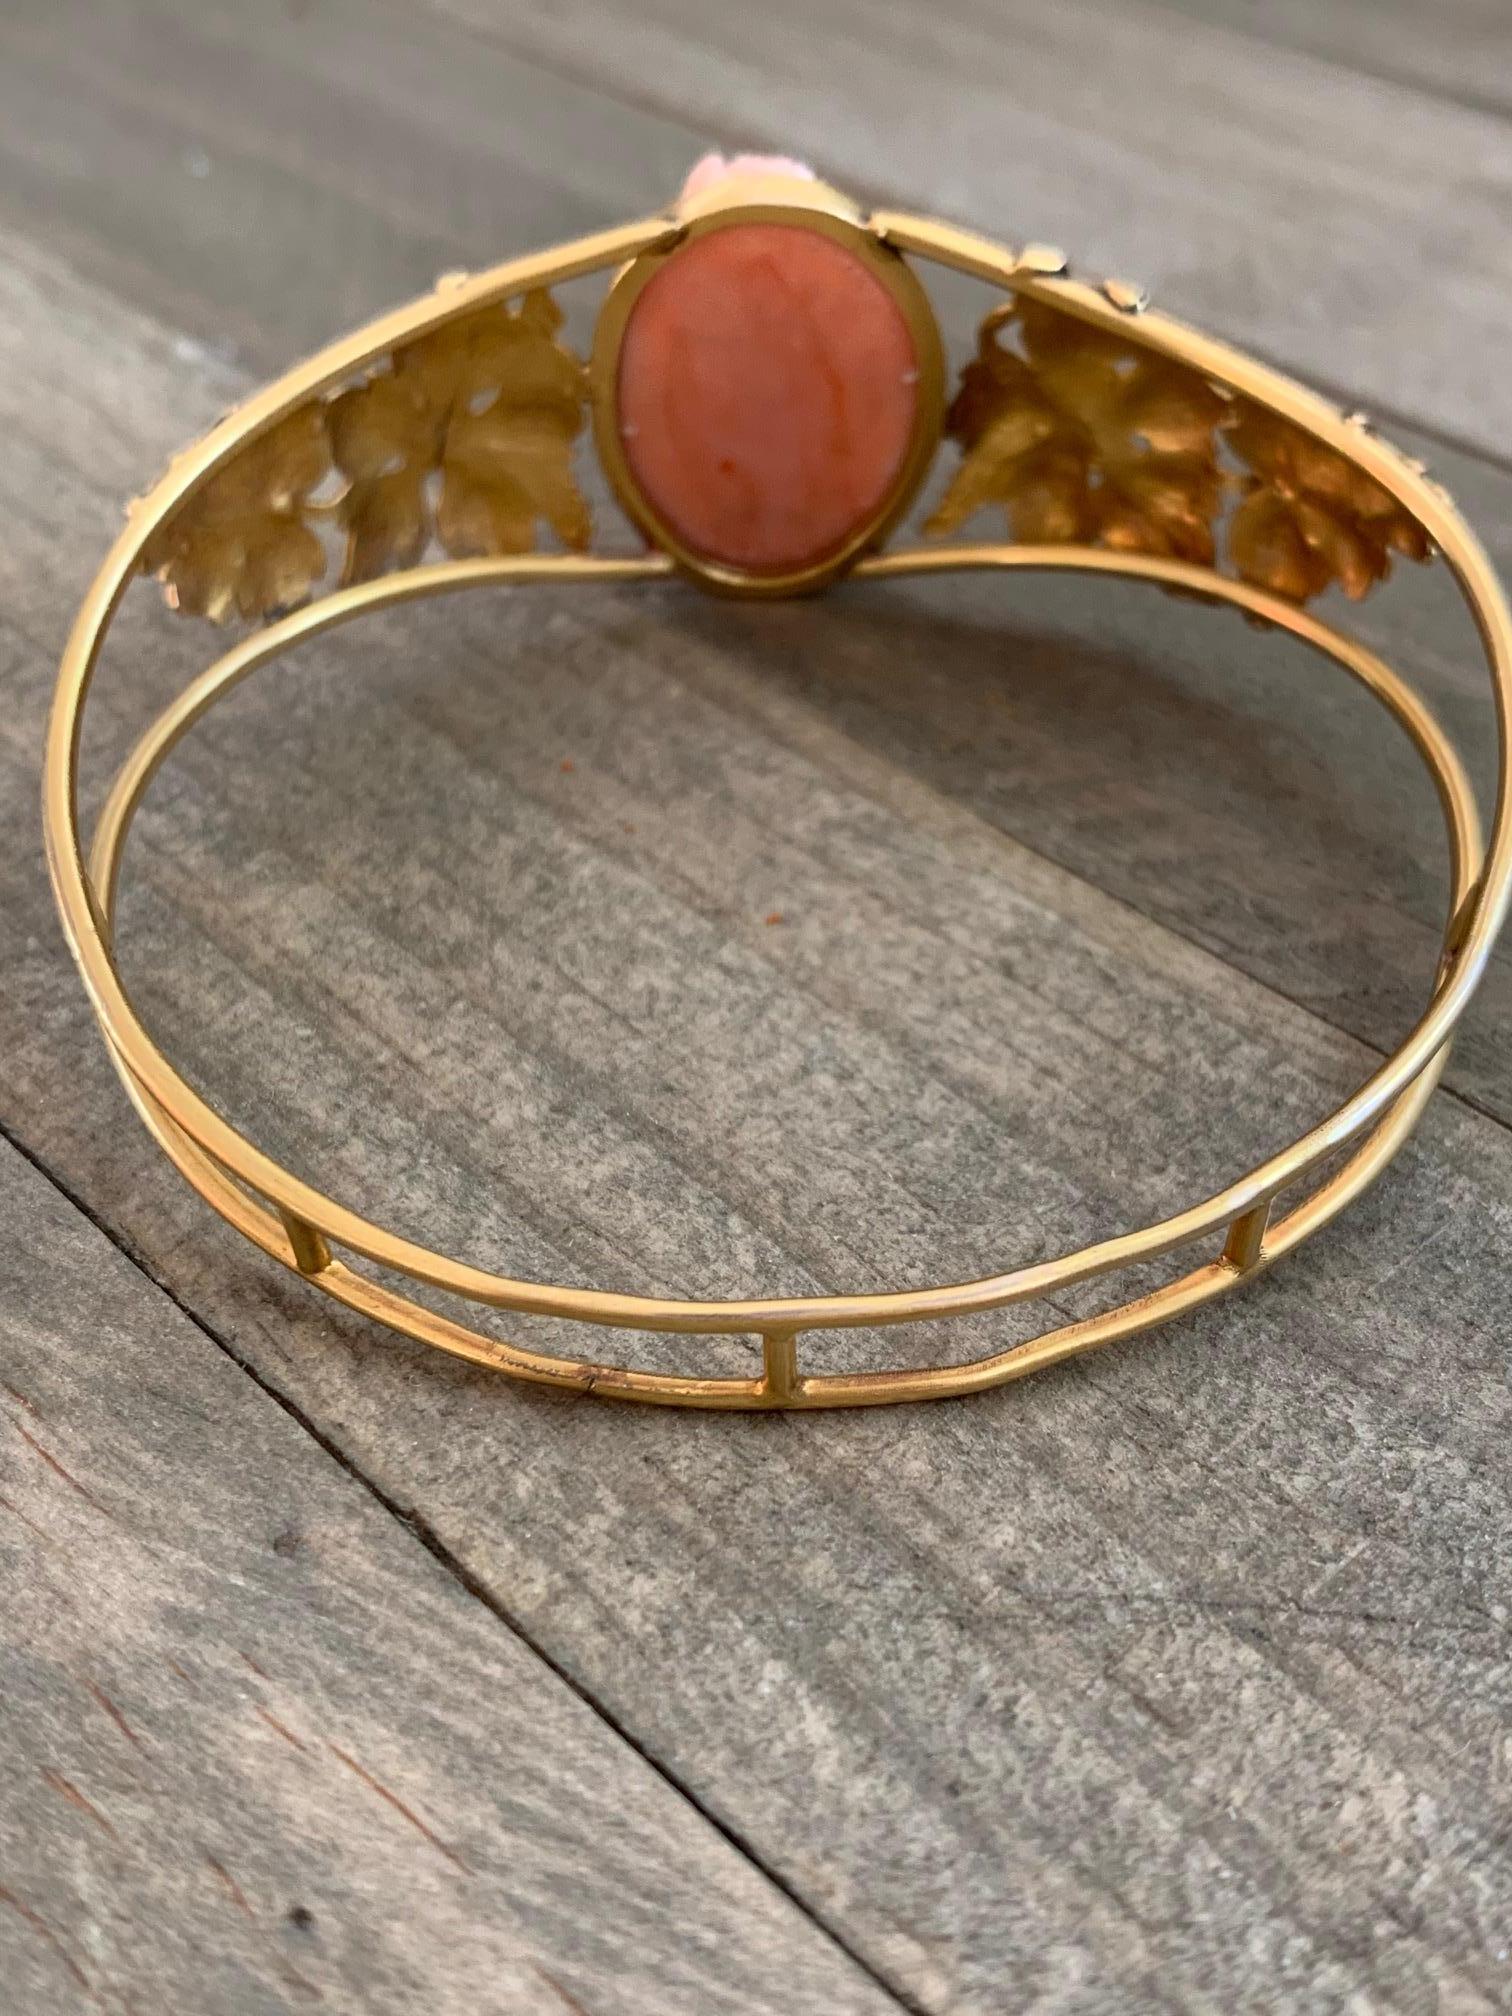 Art Nouveau Mediterranean Salmon Coral Cameo 14 Karat Gold Bangle In Excellent Condition For Sale In St. Louis Park, MN